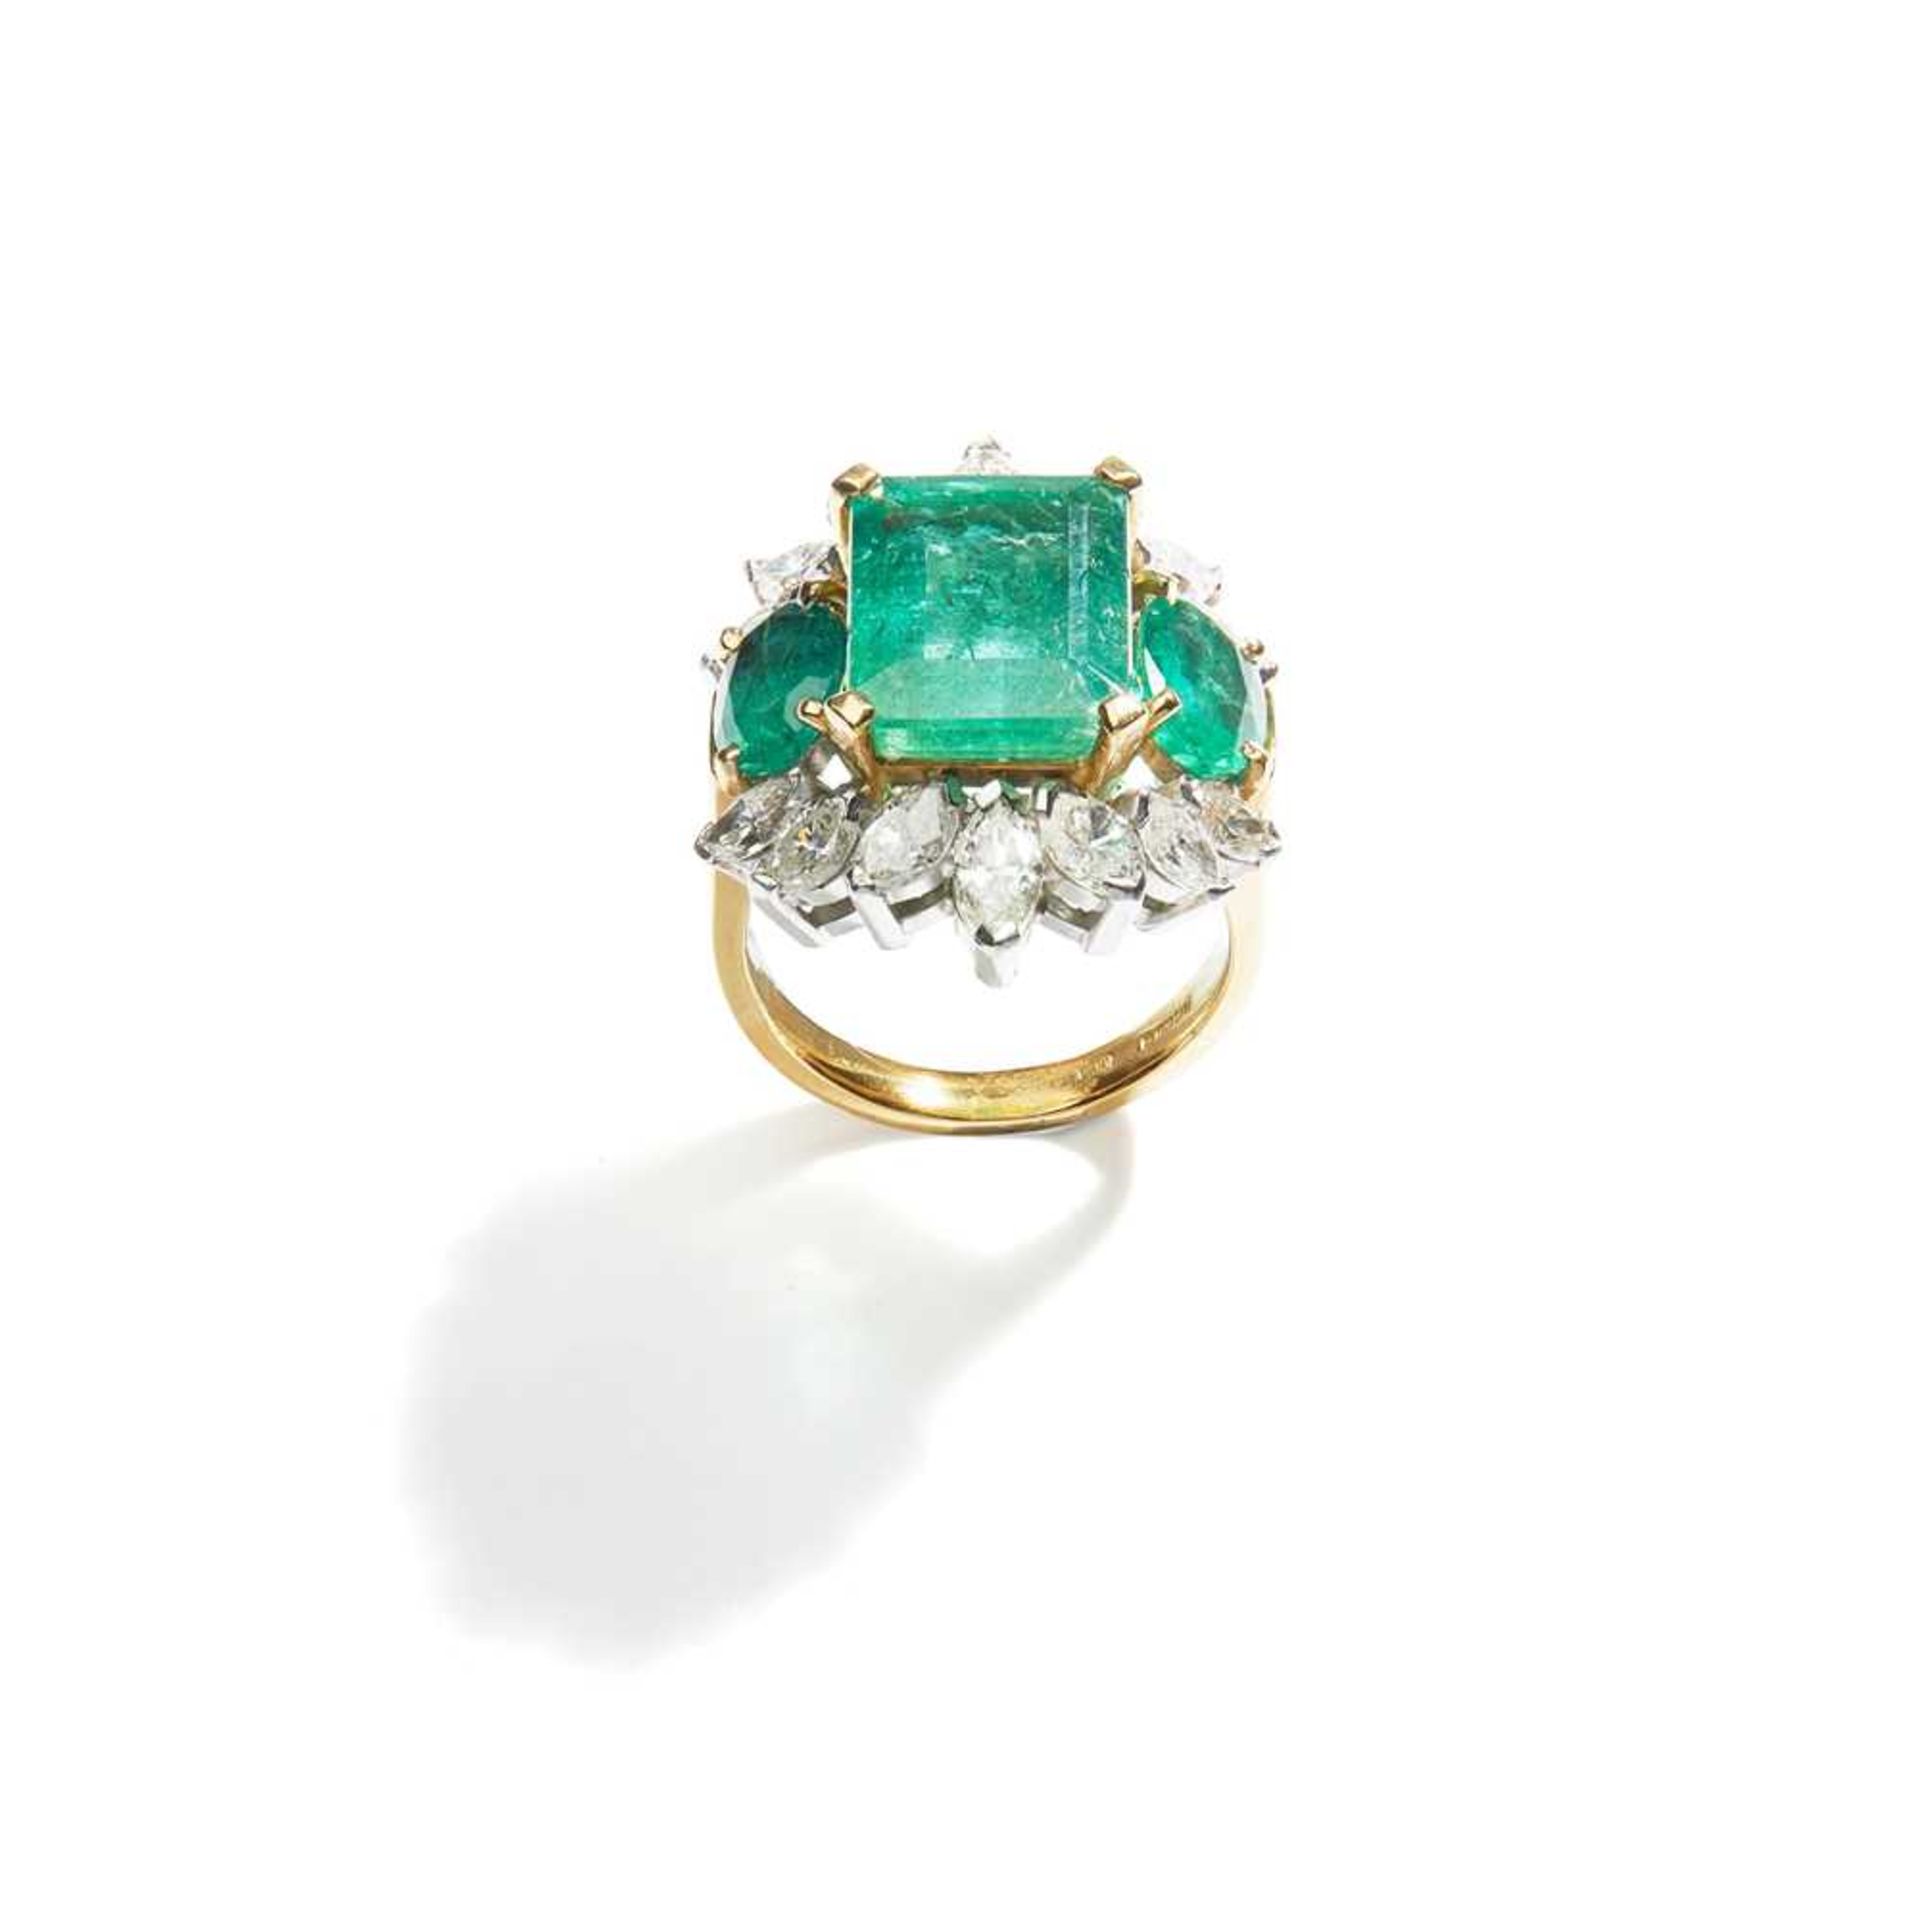 An emerald and diamond dress ring, by Eric N Smith - Image 2 of 2